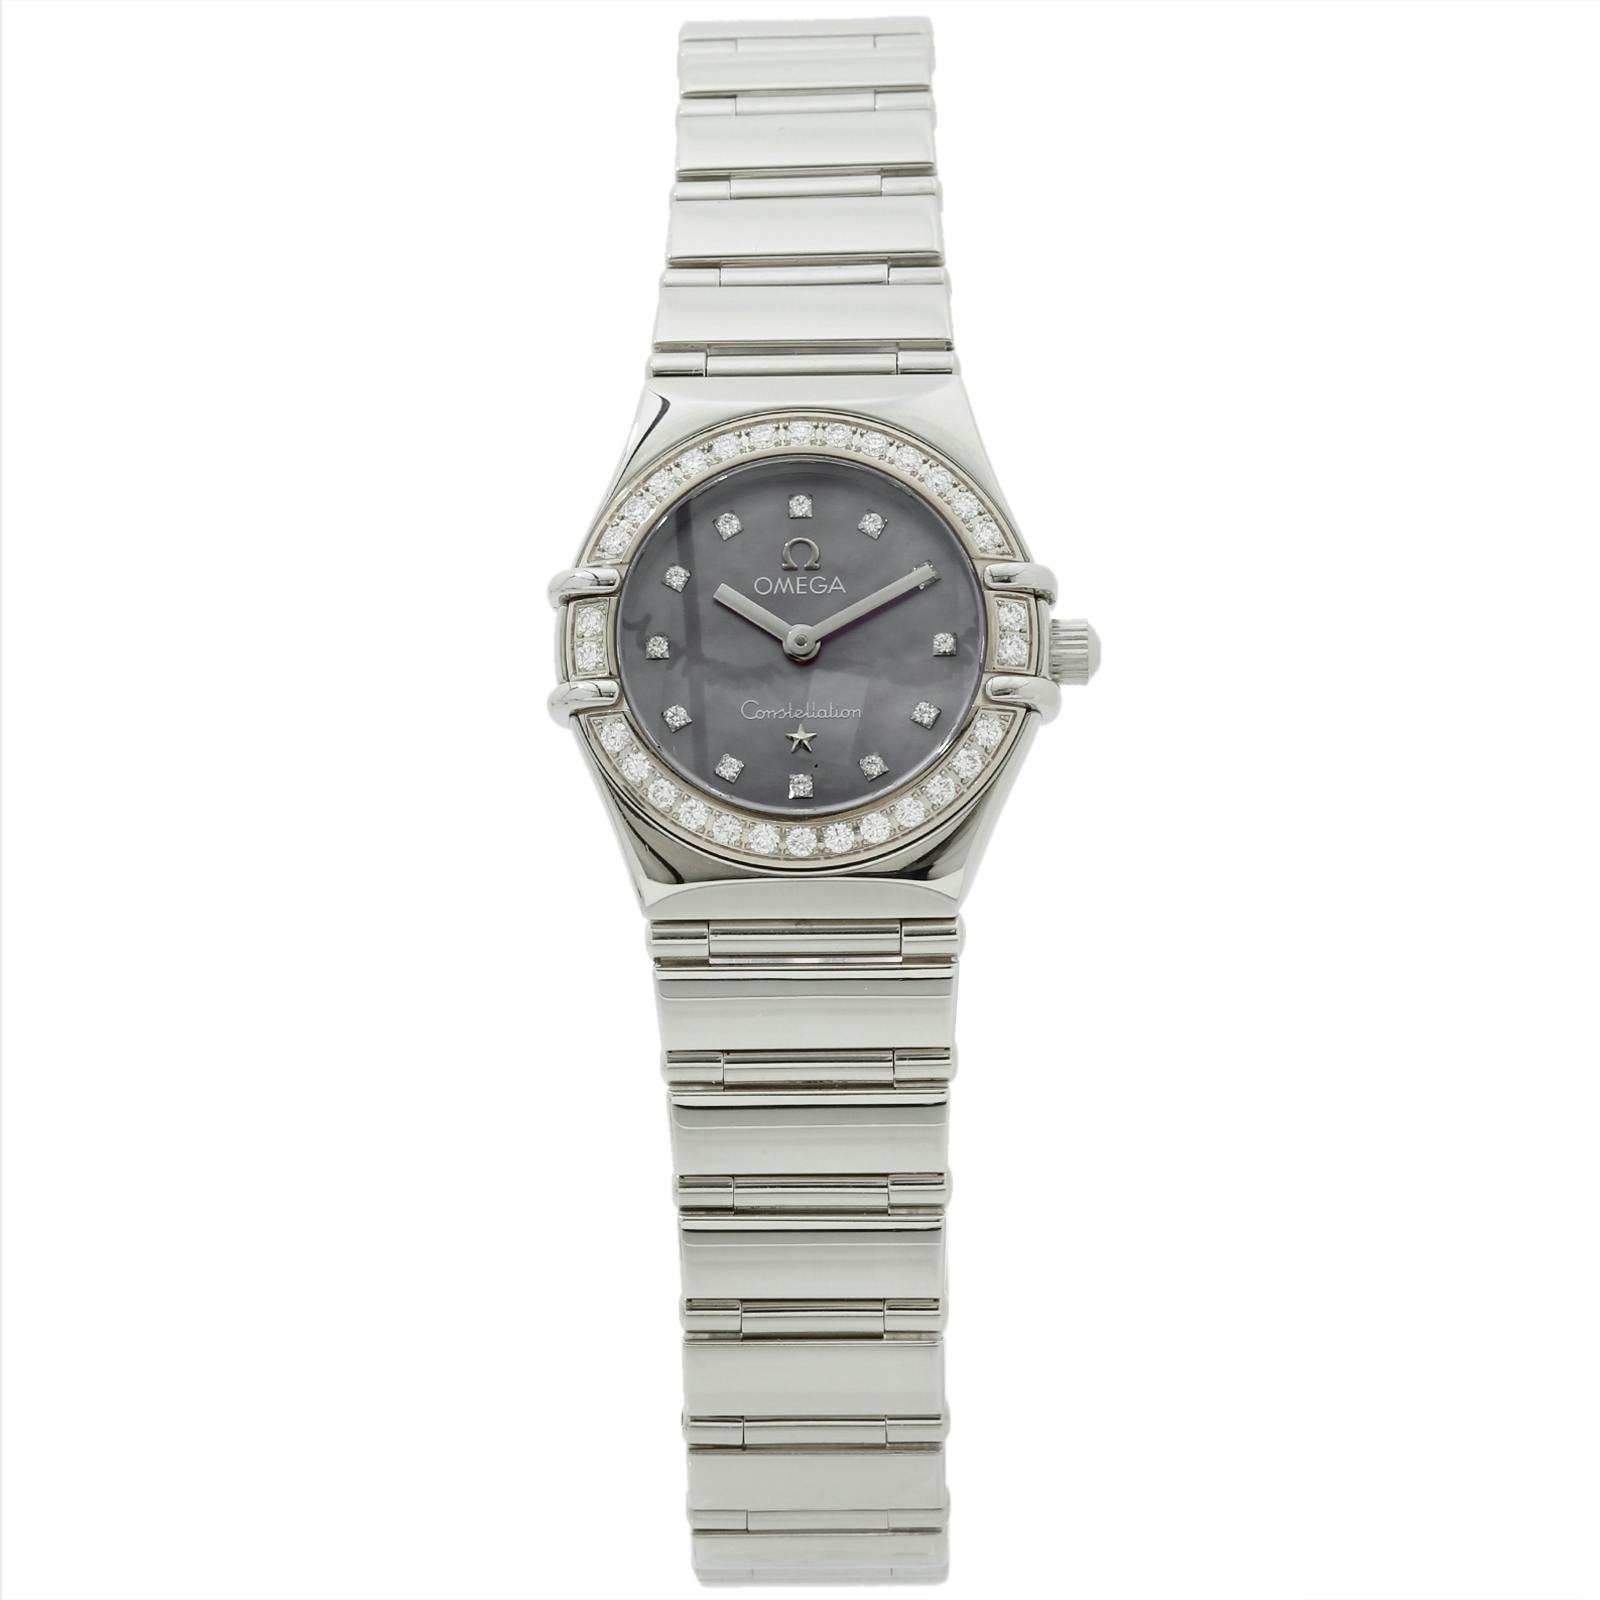 Omega Constellation My Choice Limited Edition 1457.78.00 | WatchBox